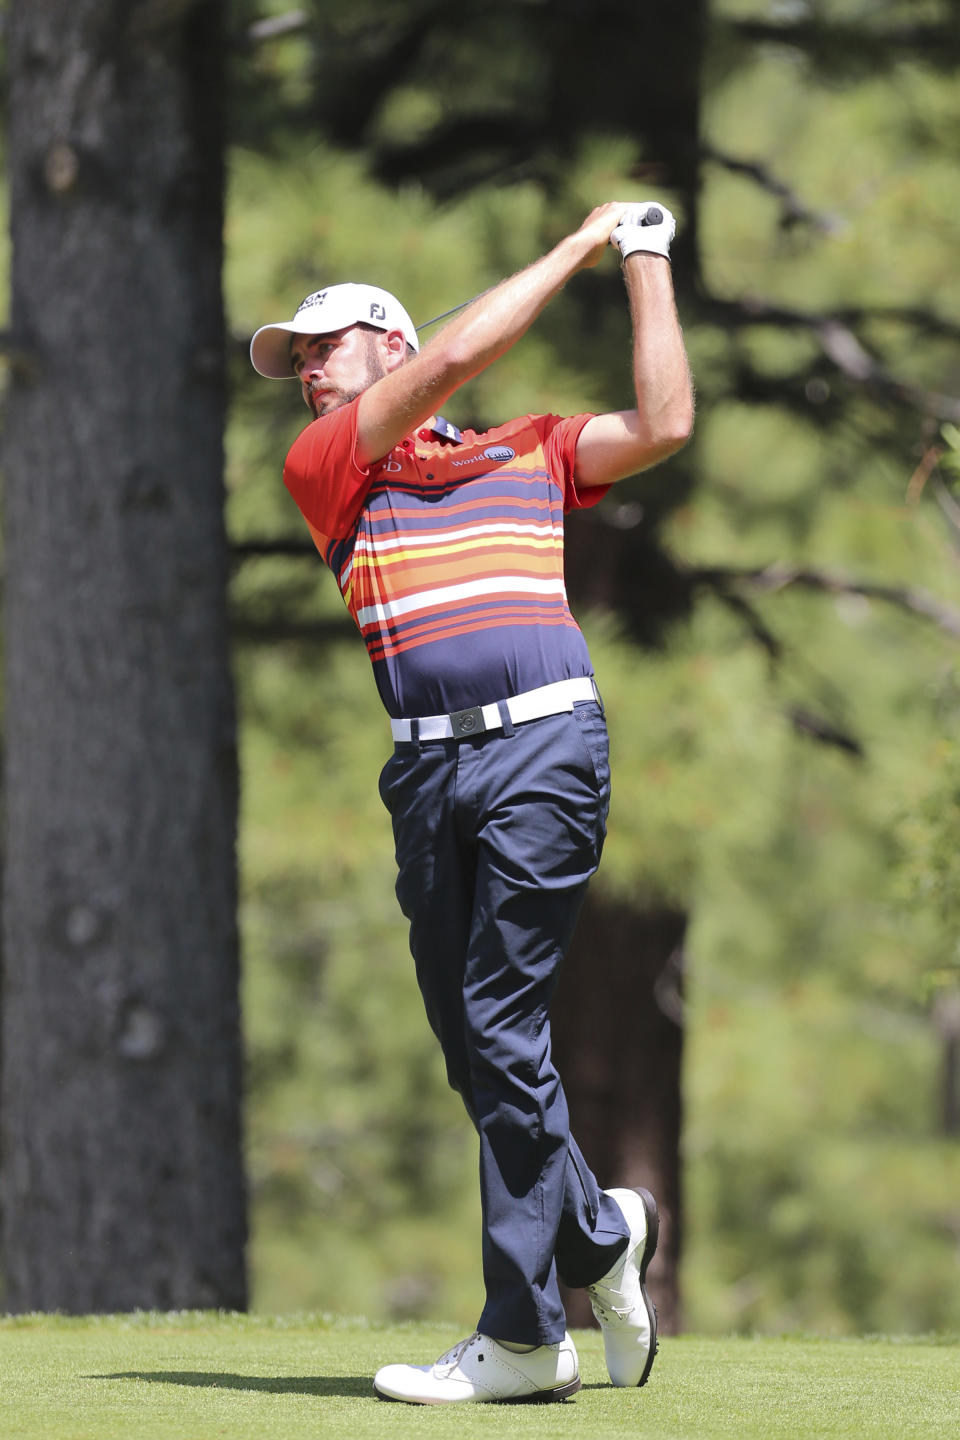 Troy Merritt tees-off during his final round in the Barracuda Championship golf tournament at Montreux Golf & Country Club in Reno, Nev. Sunday July 28, 2019. (AP Photo/ Lance Iversen)